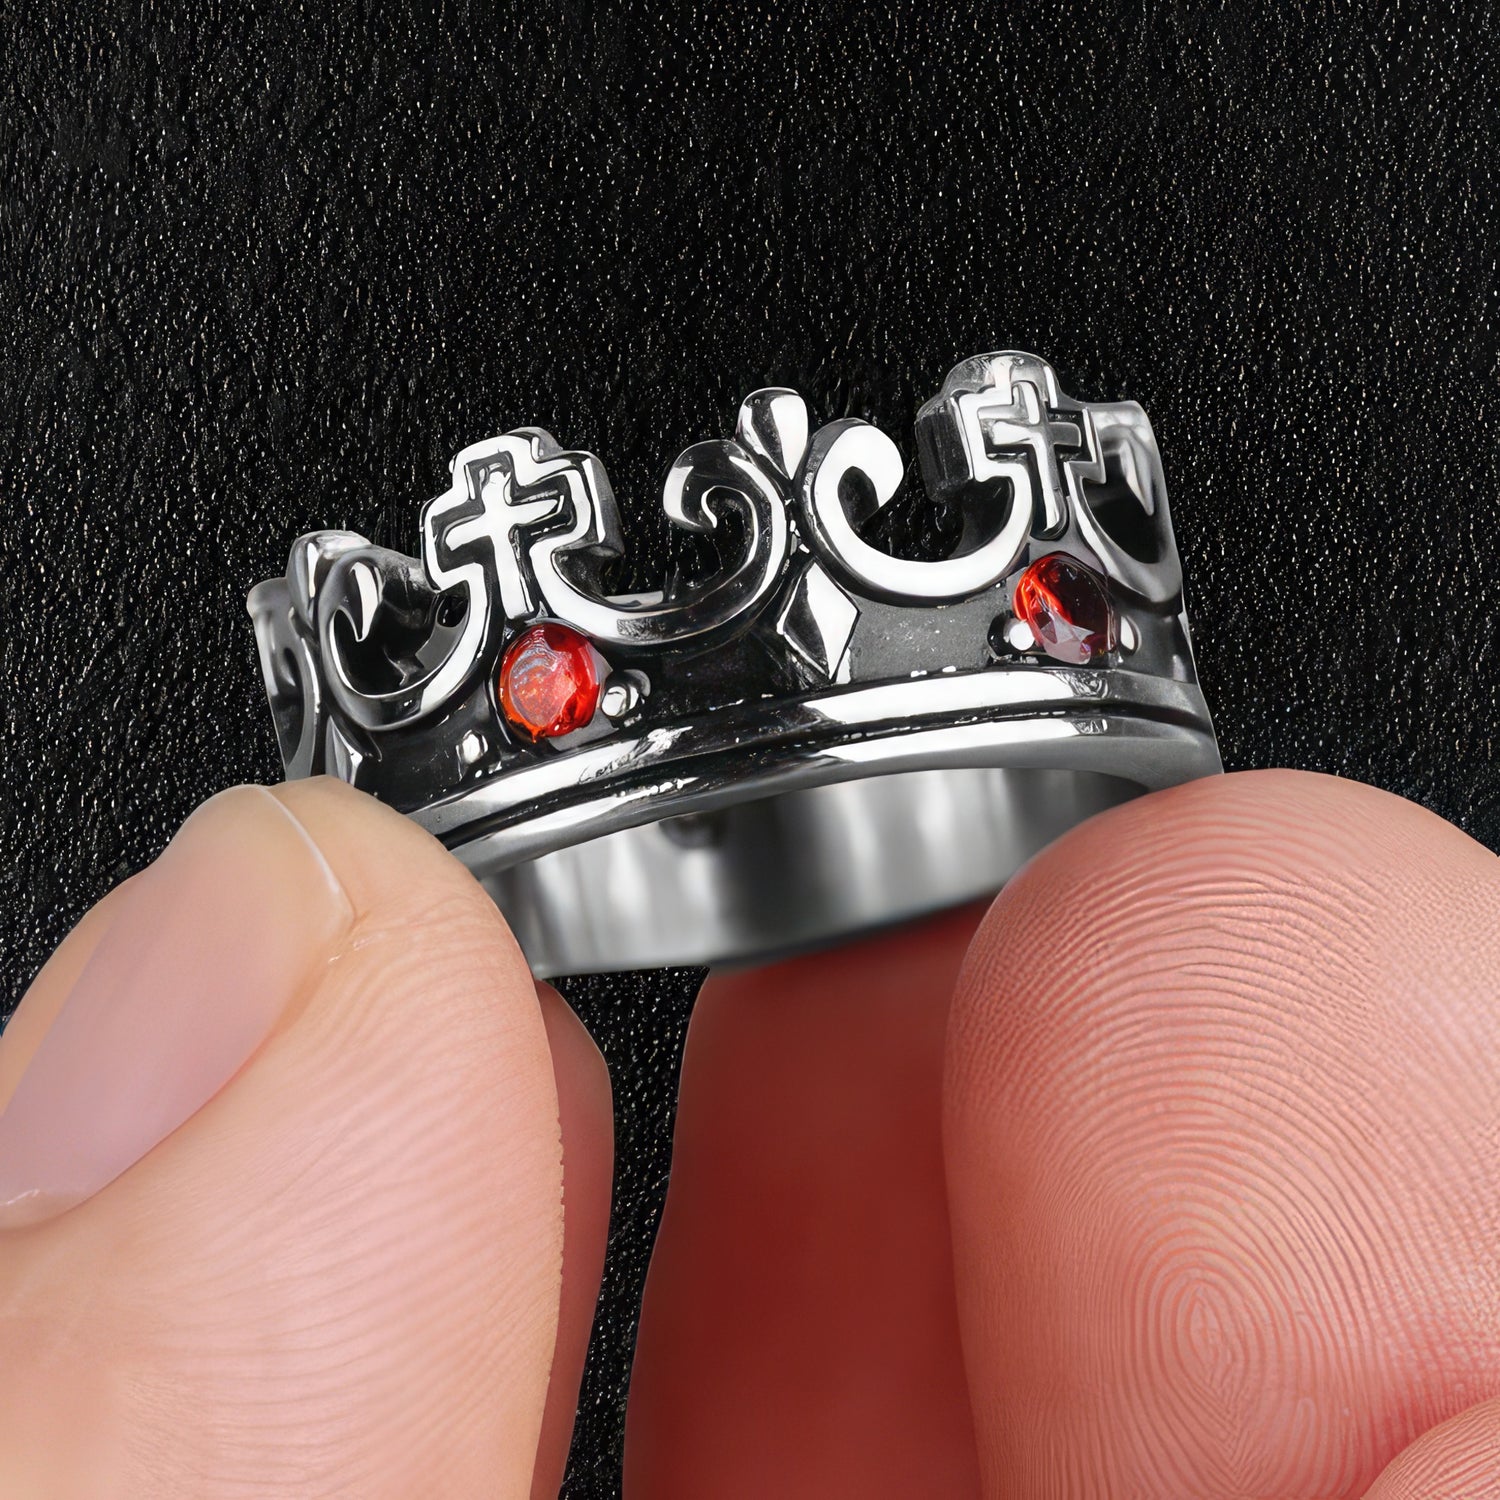 Ornatejewels | Shop for Crowns, Tiaras and Princess Rings in Silver